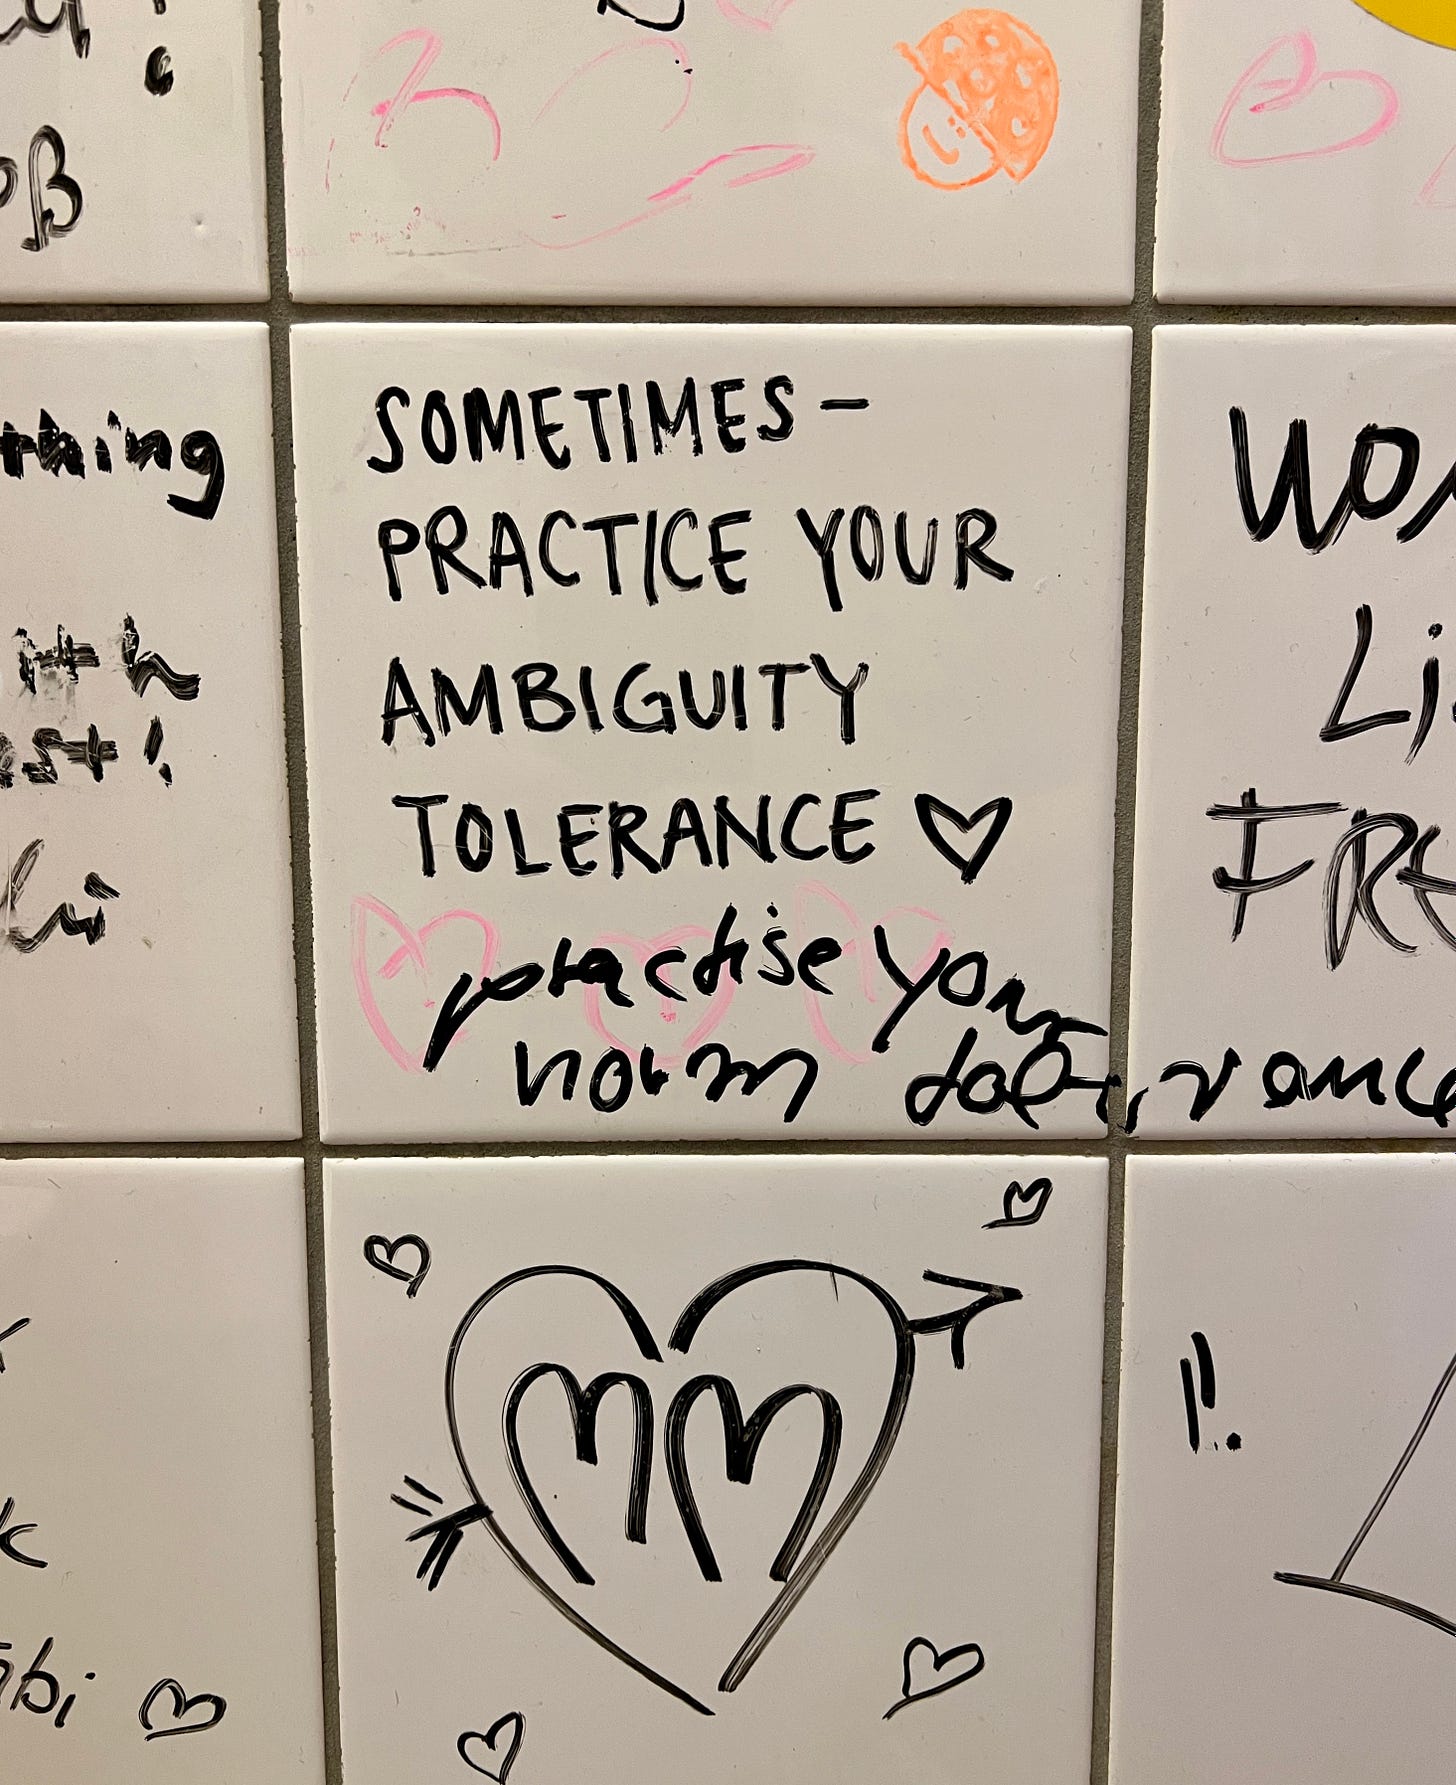 Bathroom tile with graffiti that reads "sometimes practice your ambiguity"